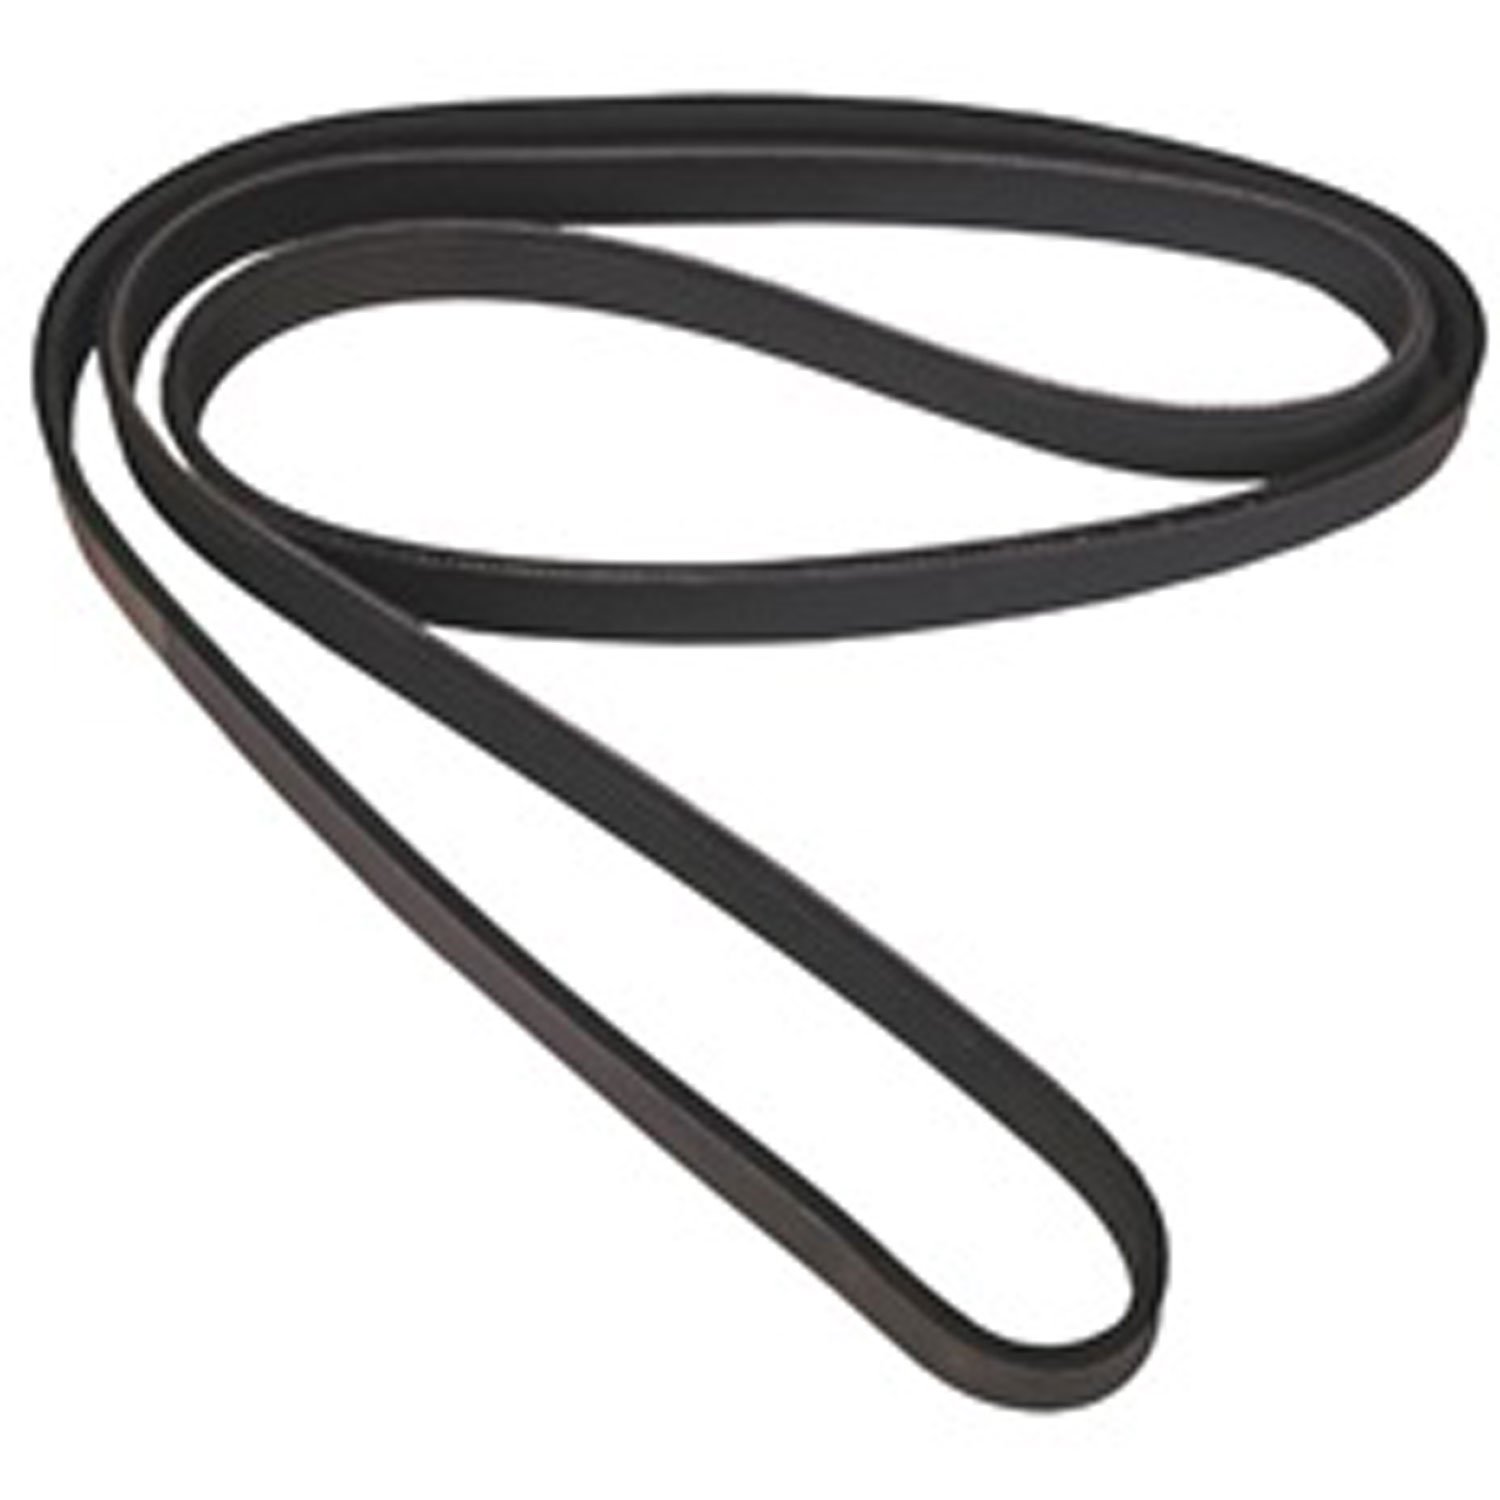 Stock replacement serpentine belt from Omix-ADA, Fits 05-07 Jeep Grand Cherokee WK with 3.7L and 4.7L engines.